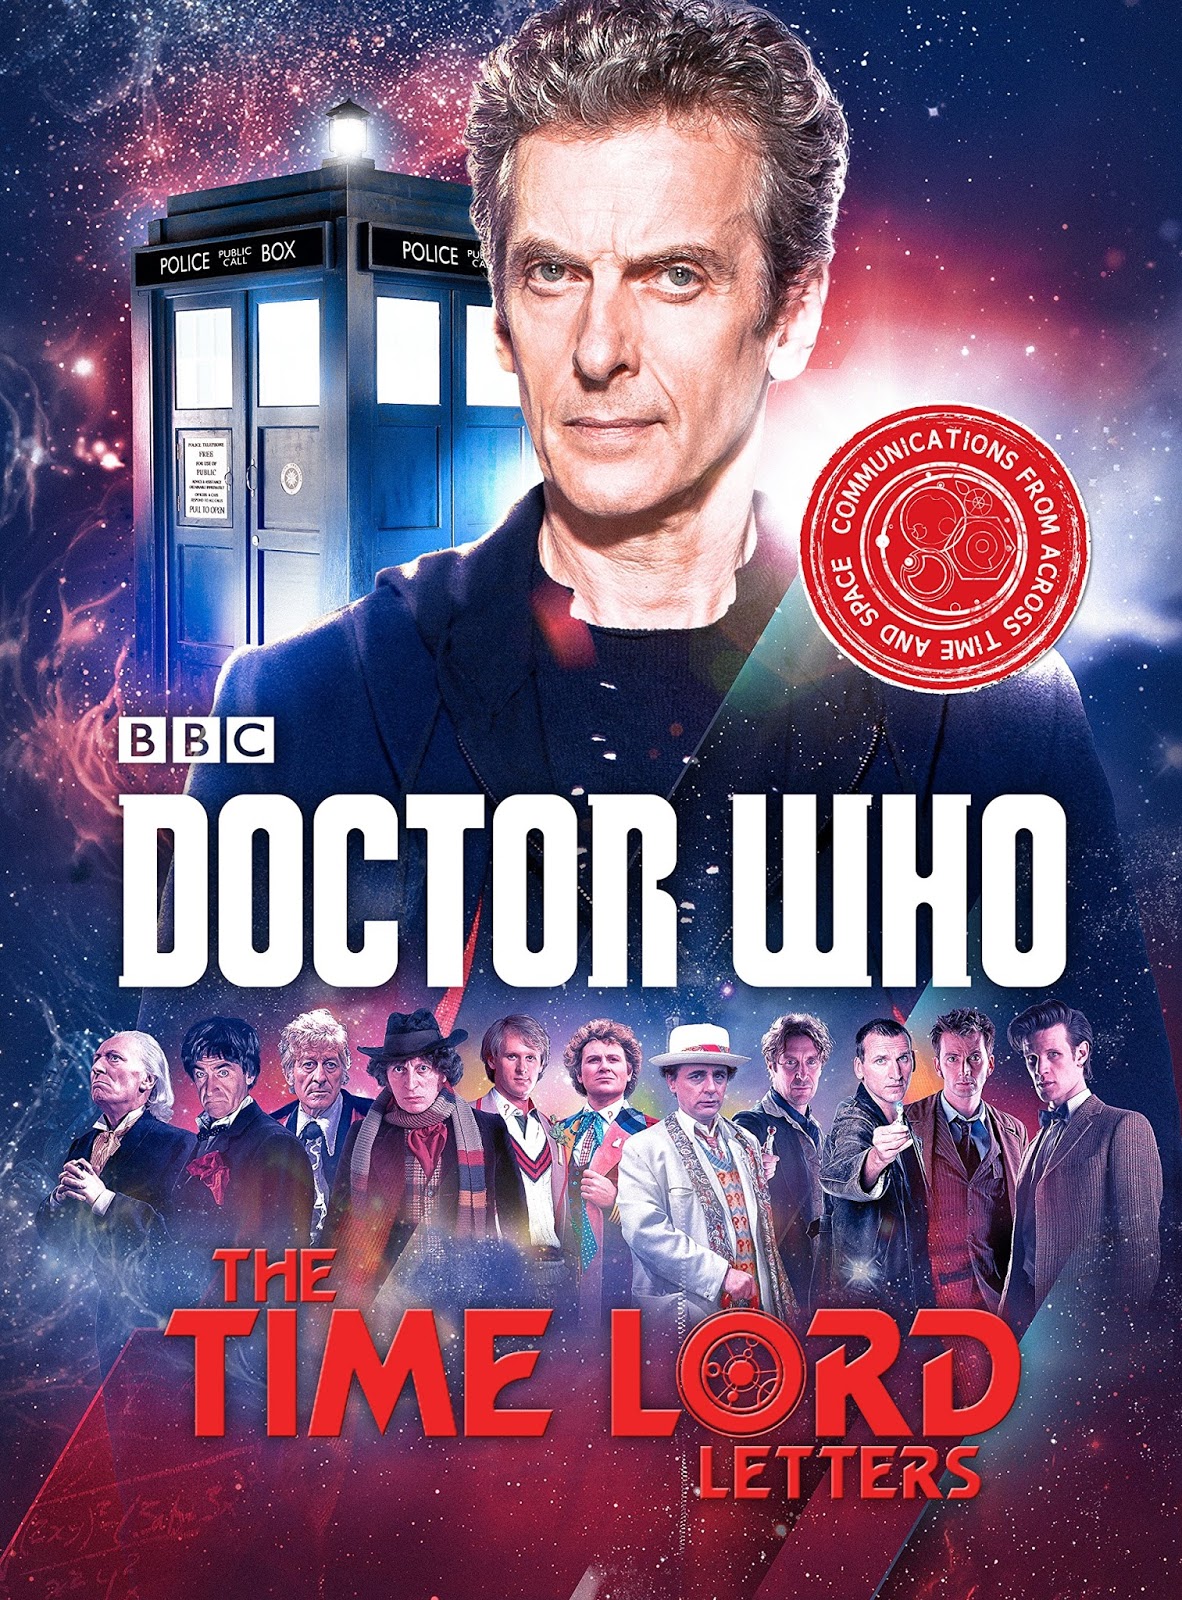 Doctor Who series 5 - Wikipedia